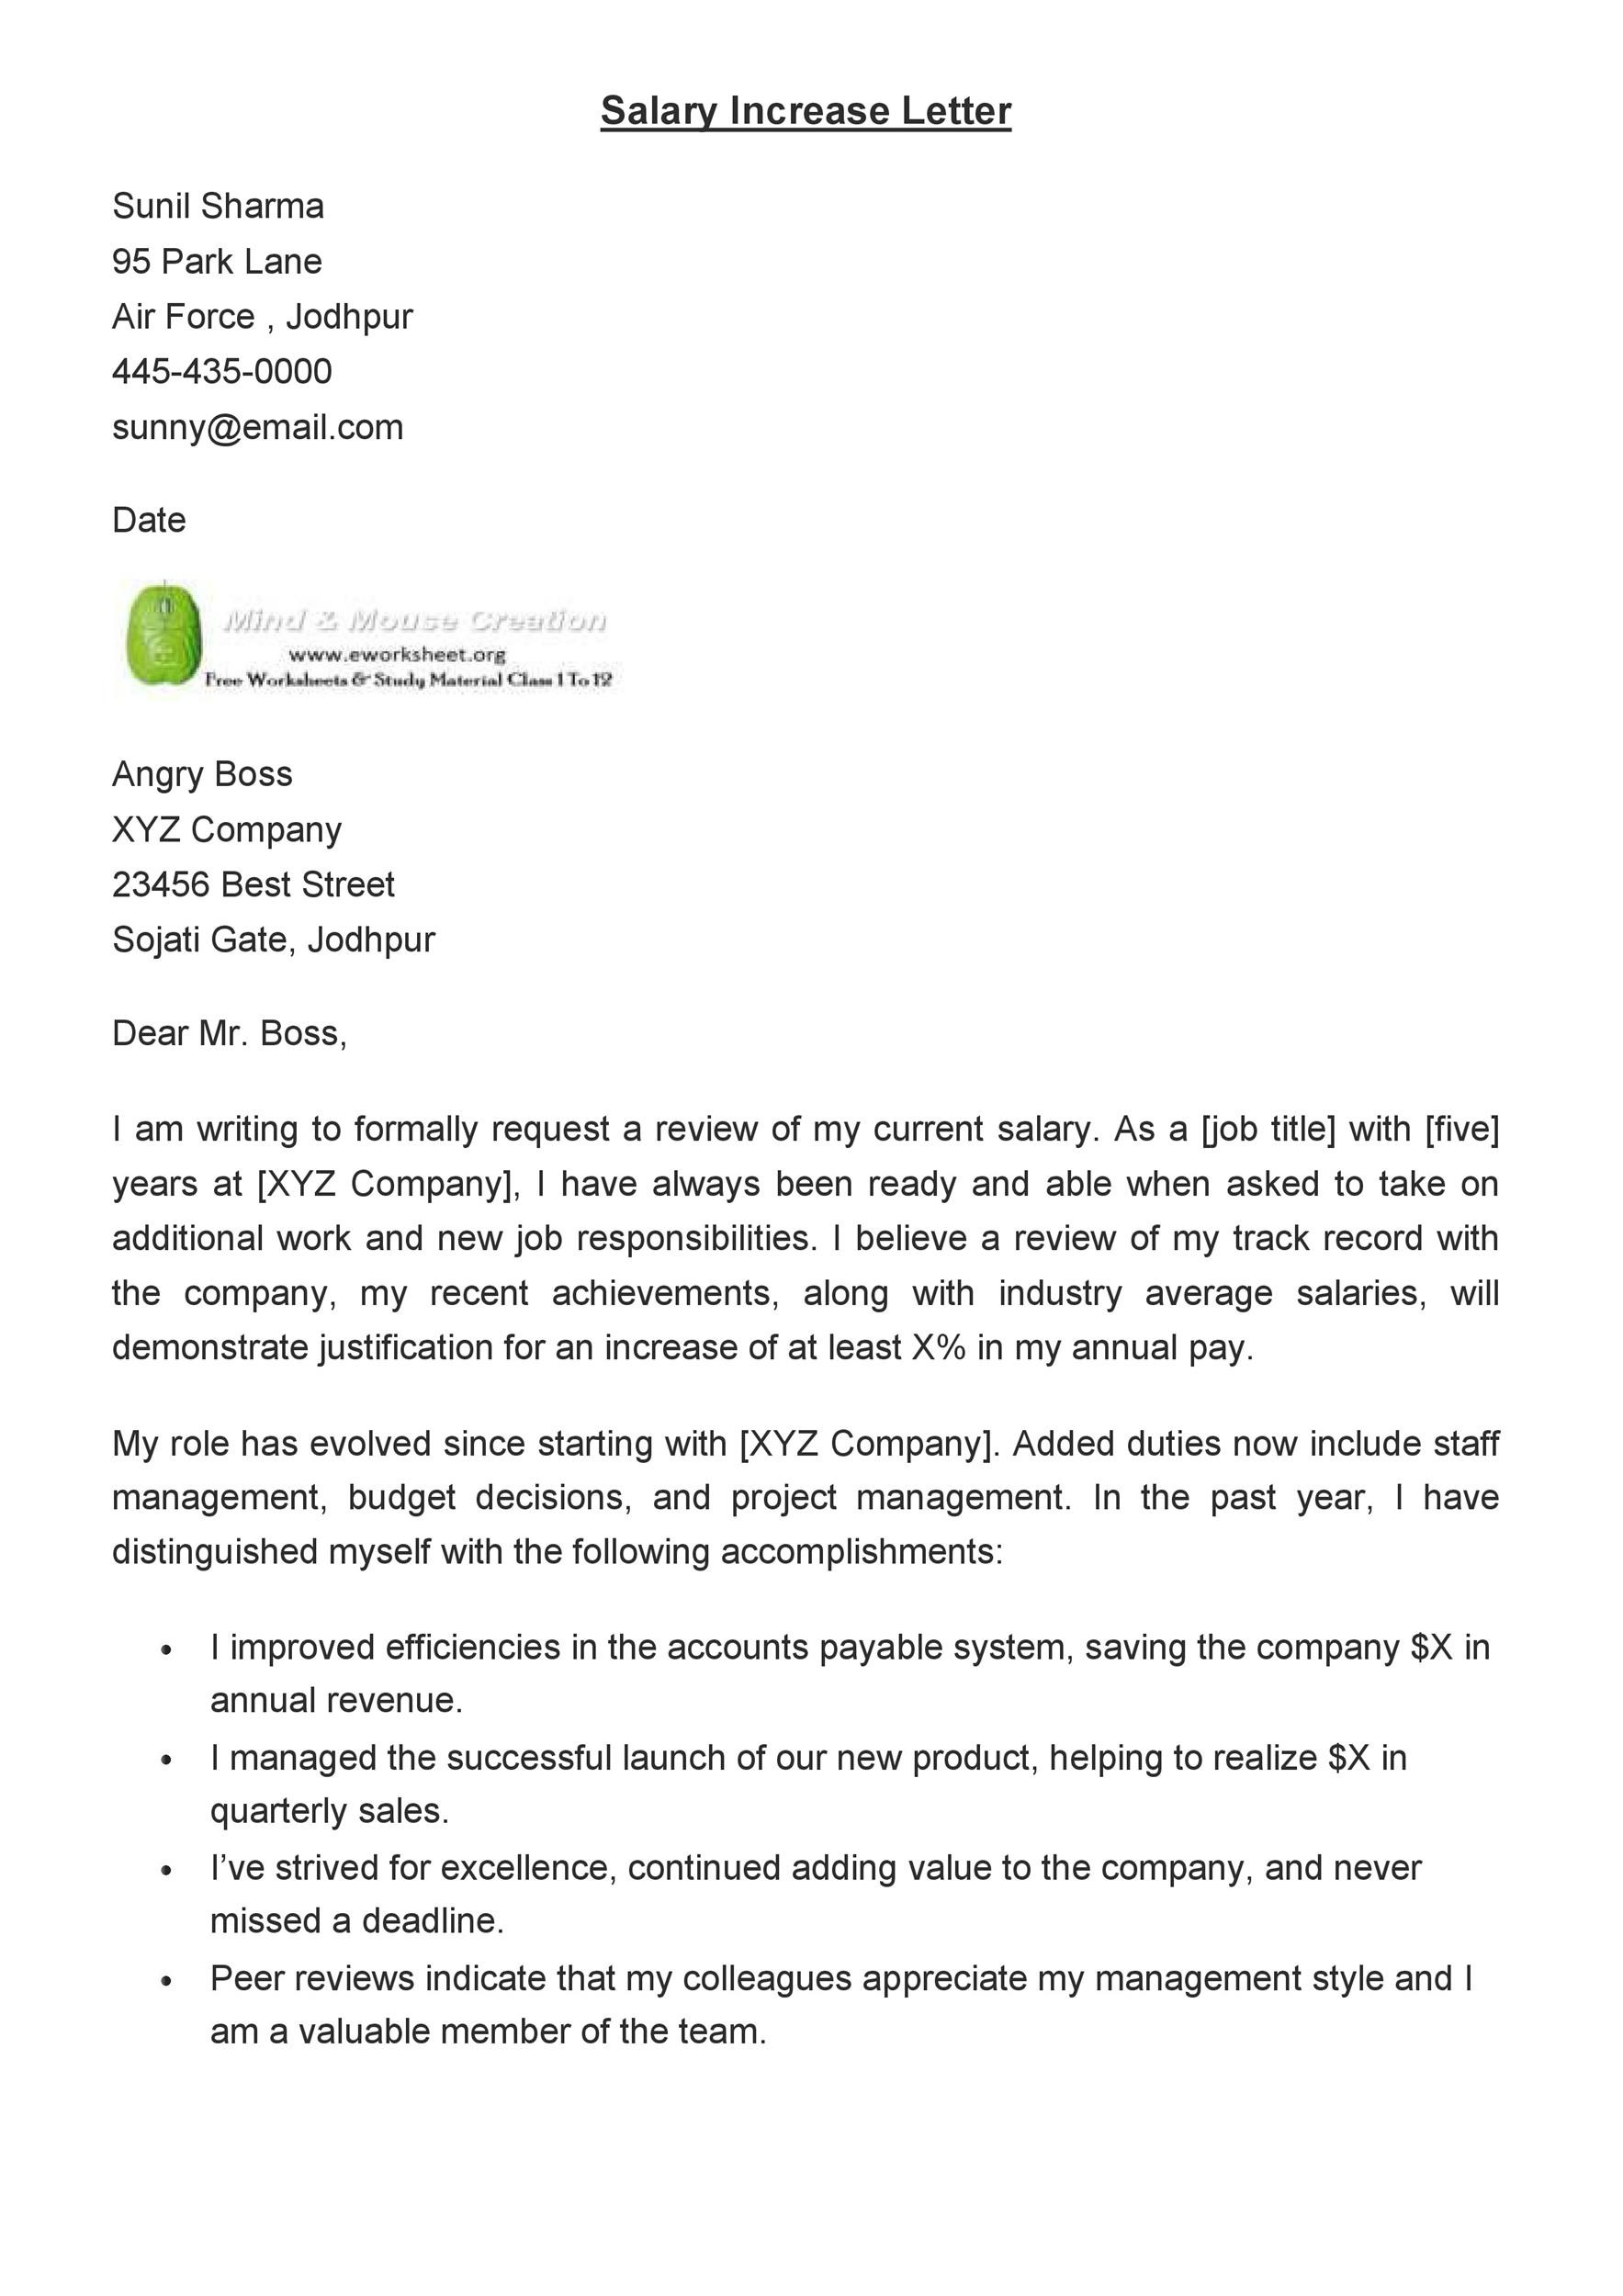 Letter Asking For A Raise Template from templatelab.com